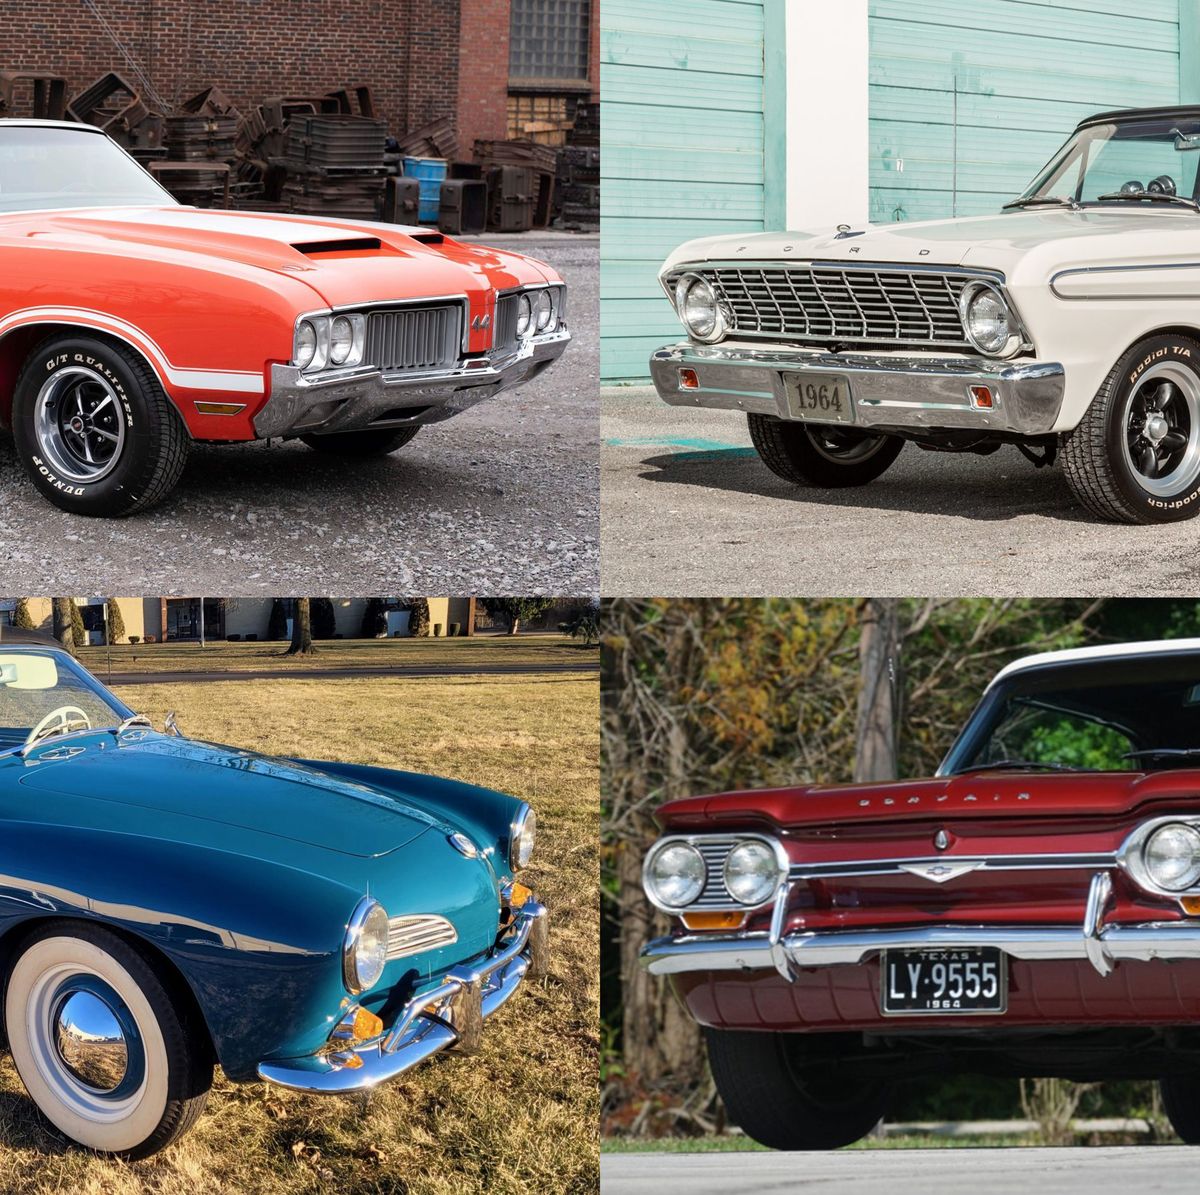 7 Vintage Convertibles That Make the Most of Spring